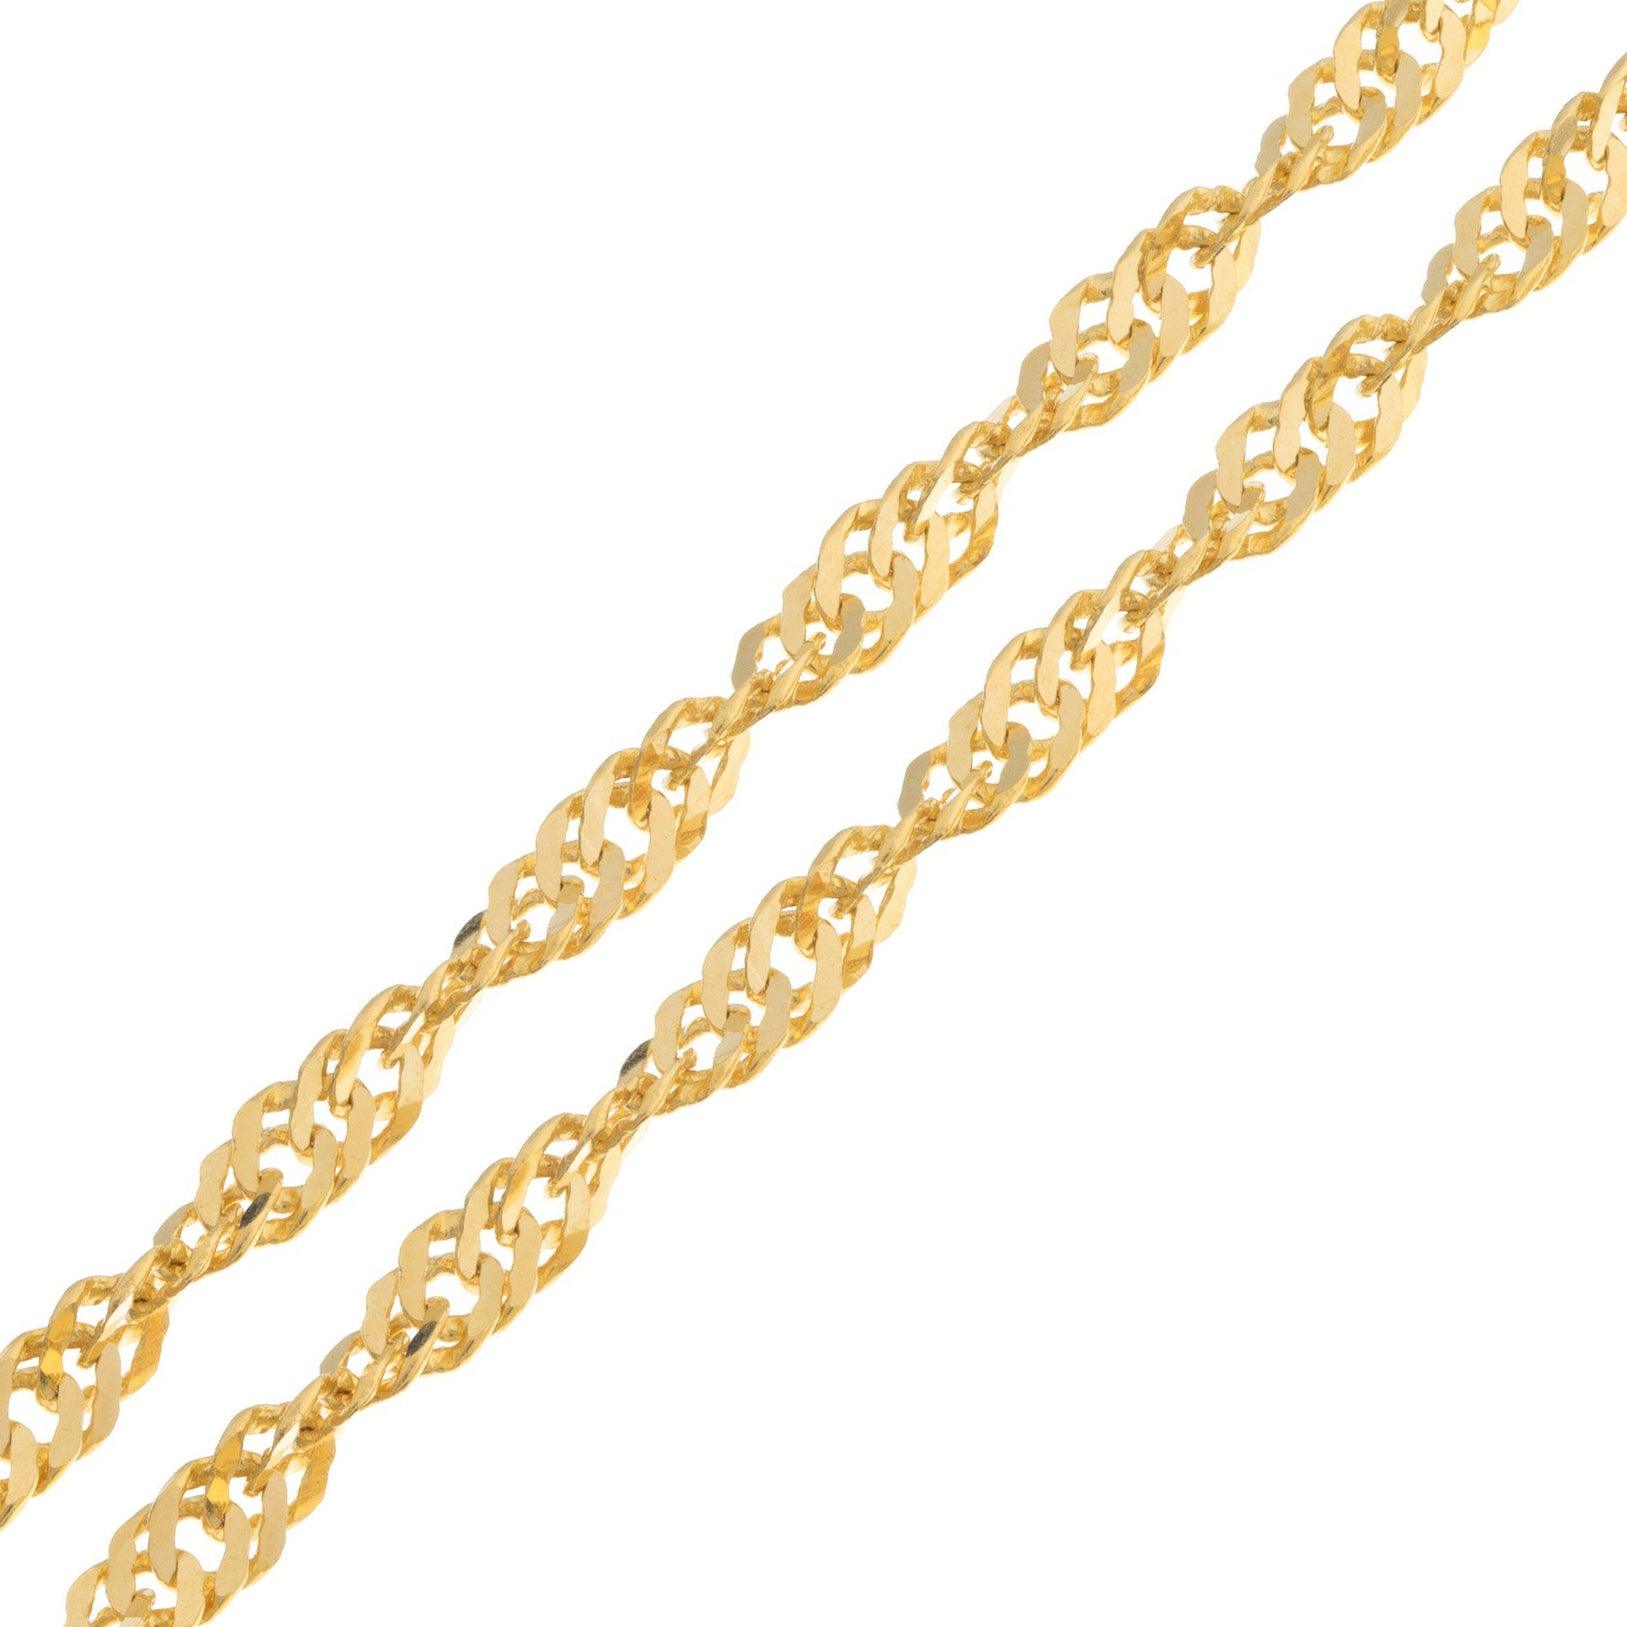 22ct Gold Ripple Unisex Chain with Lobster Clasp (C-2803)